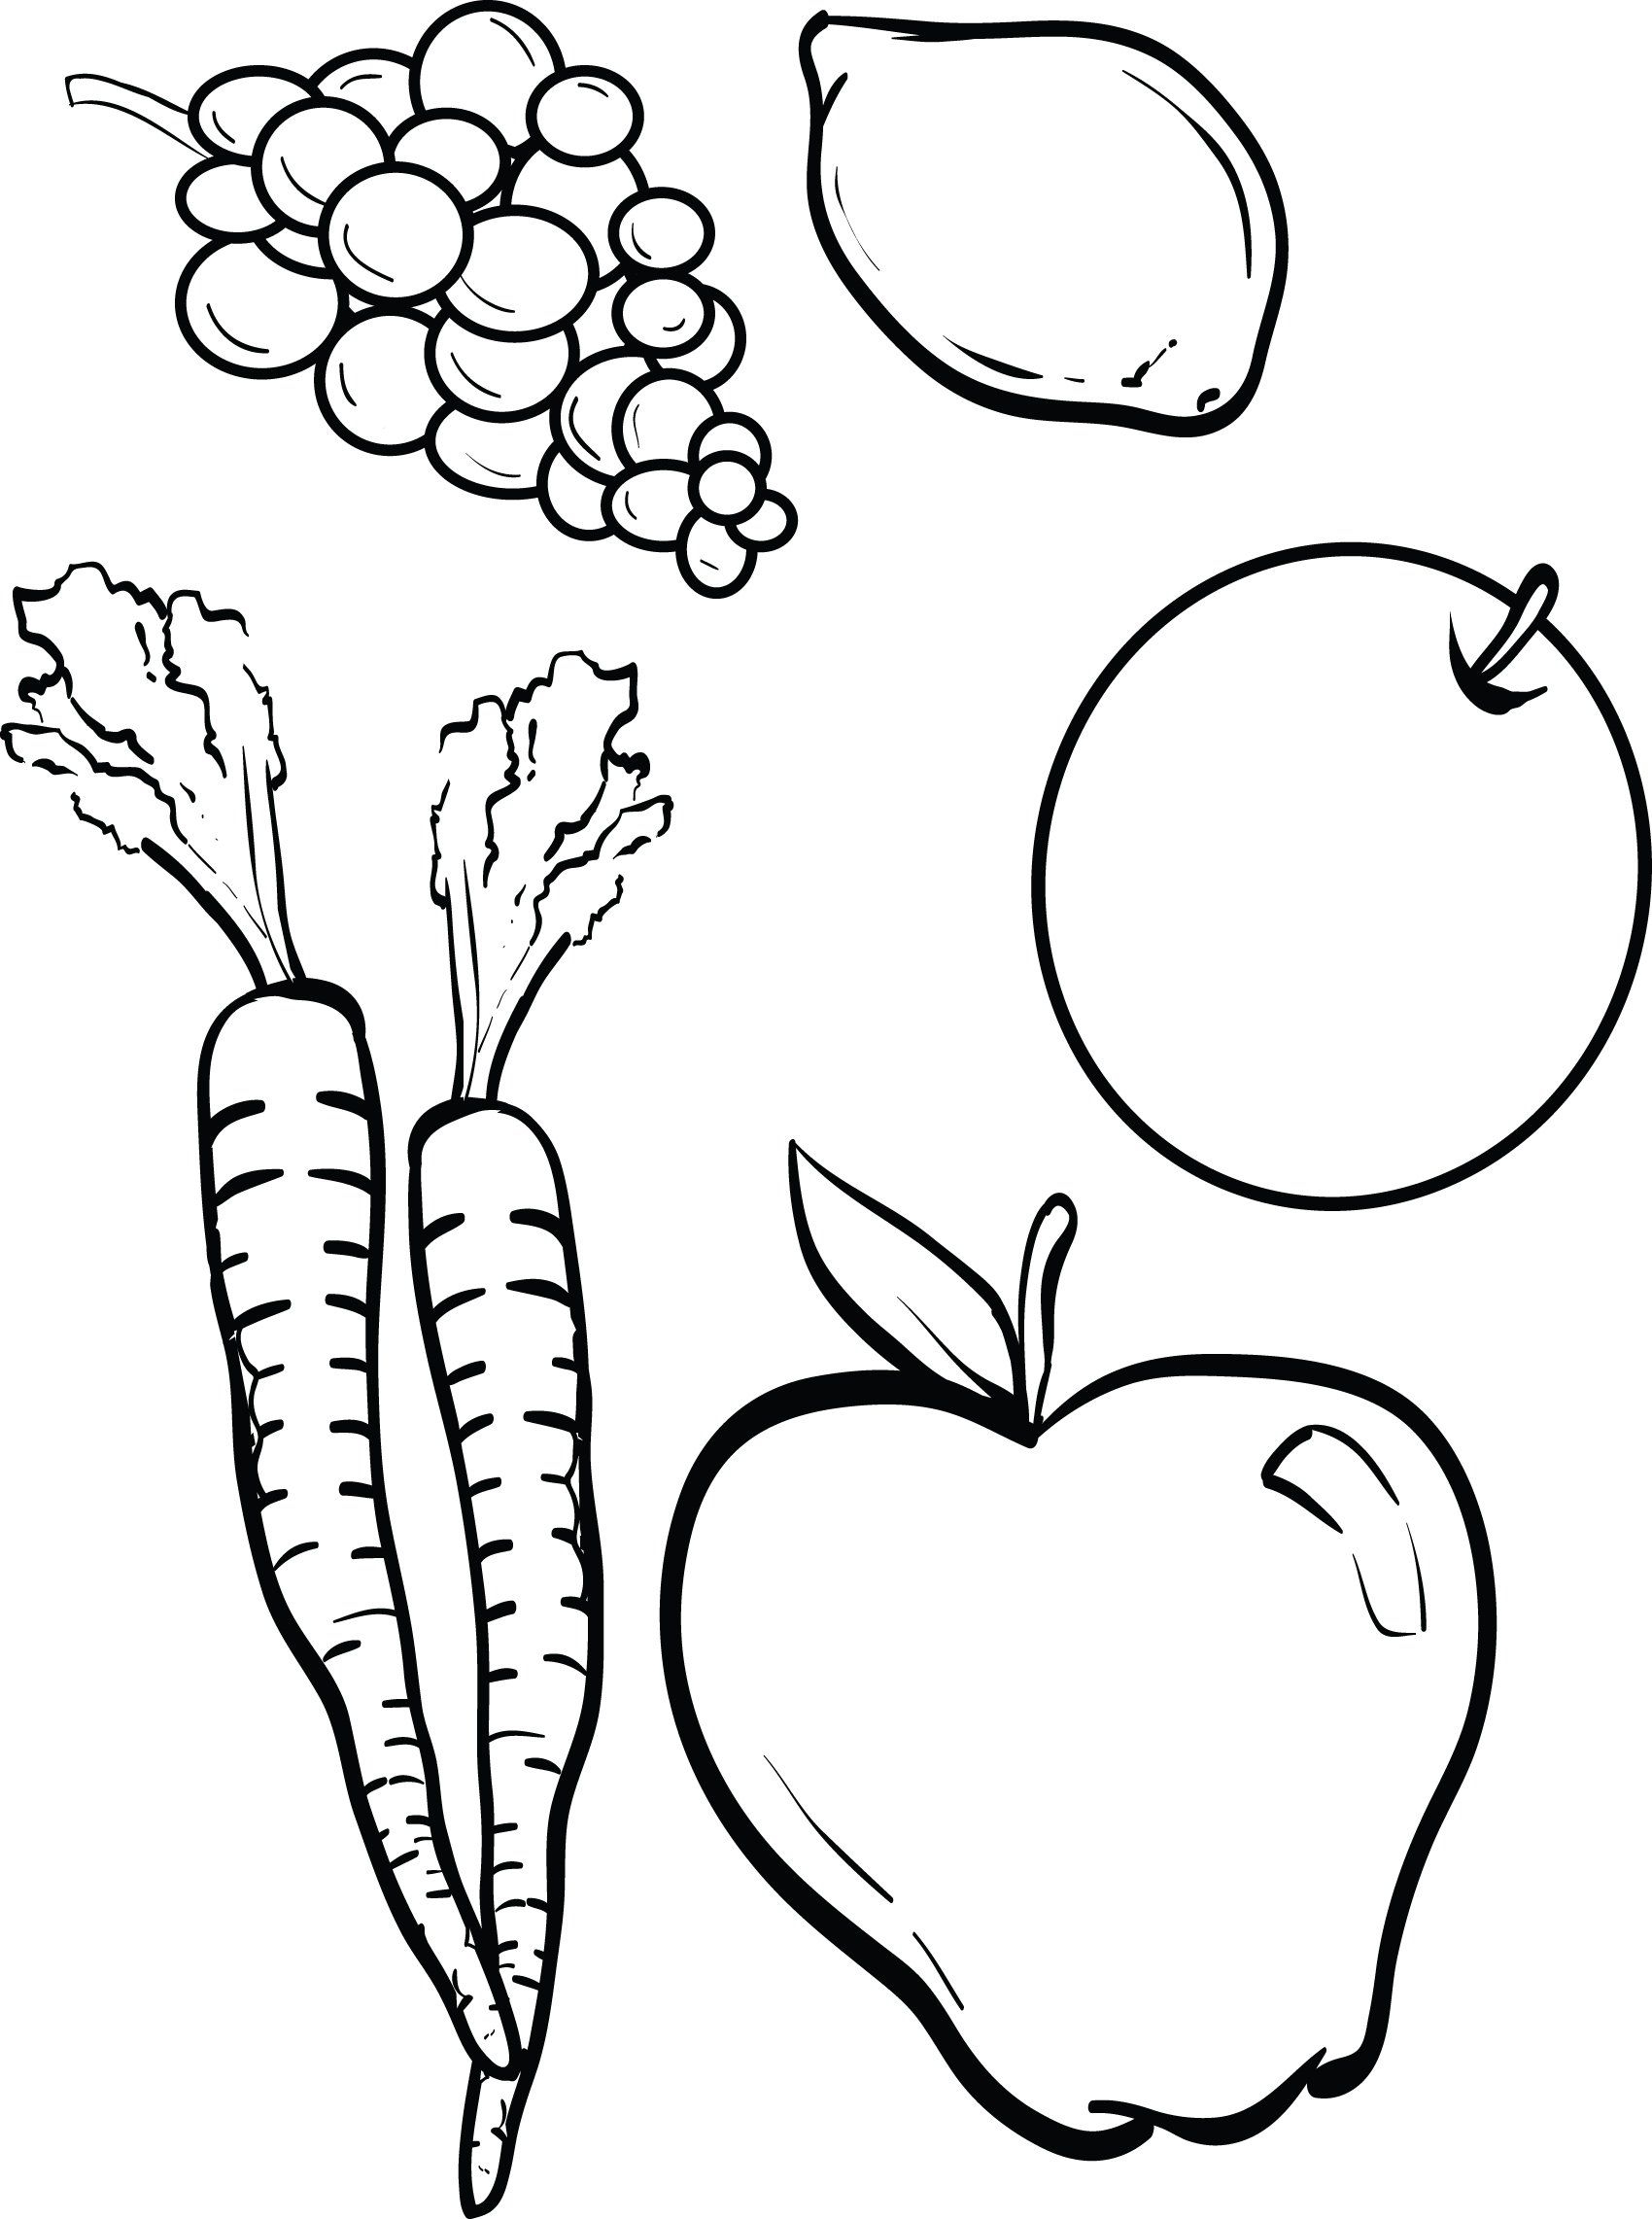 Baby fruits and vegetables #2